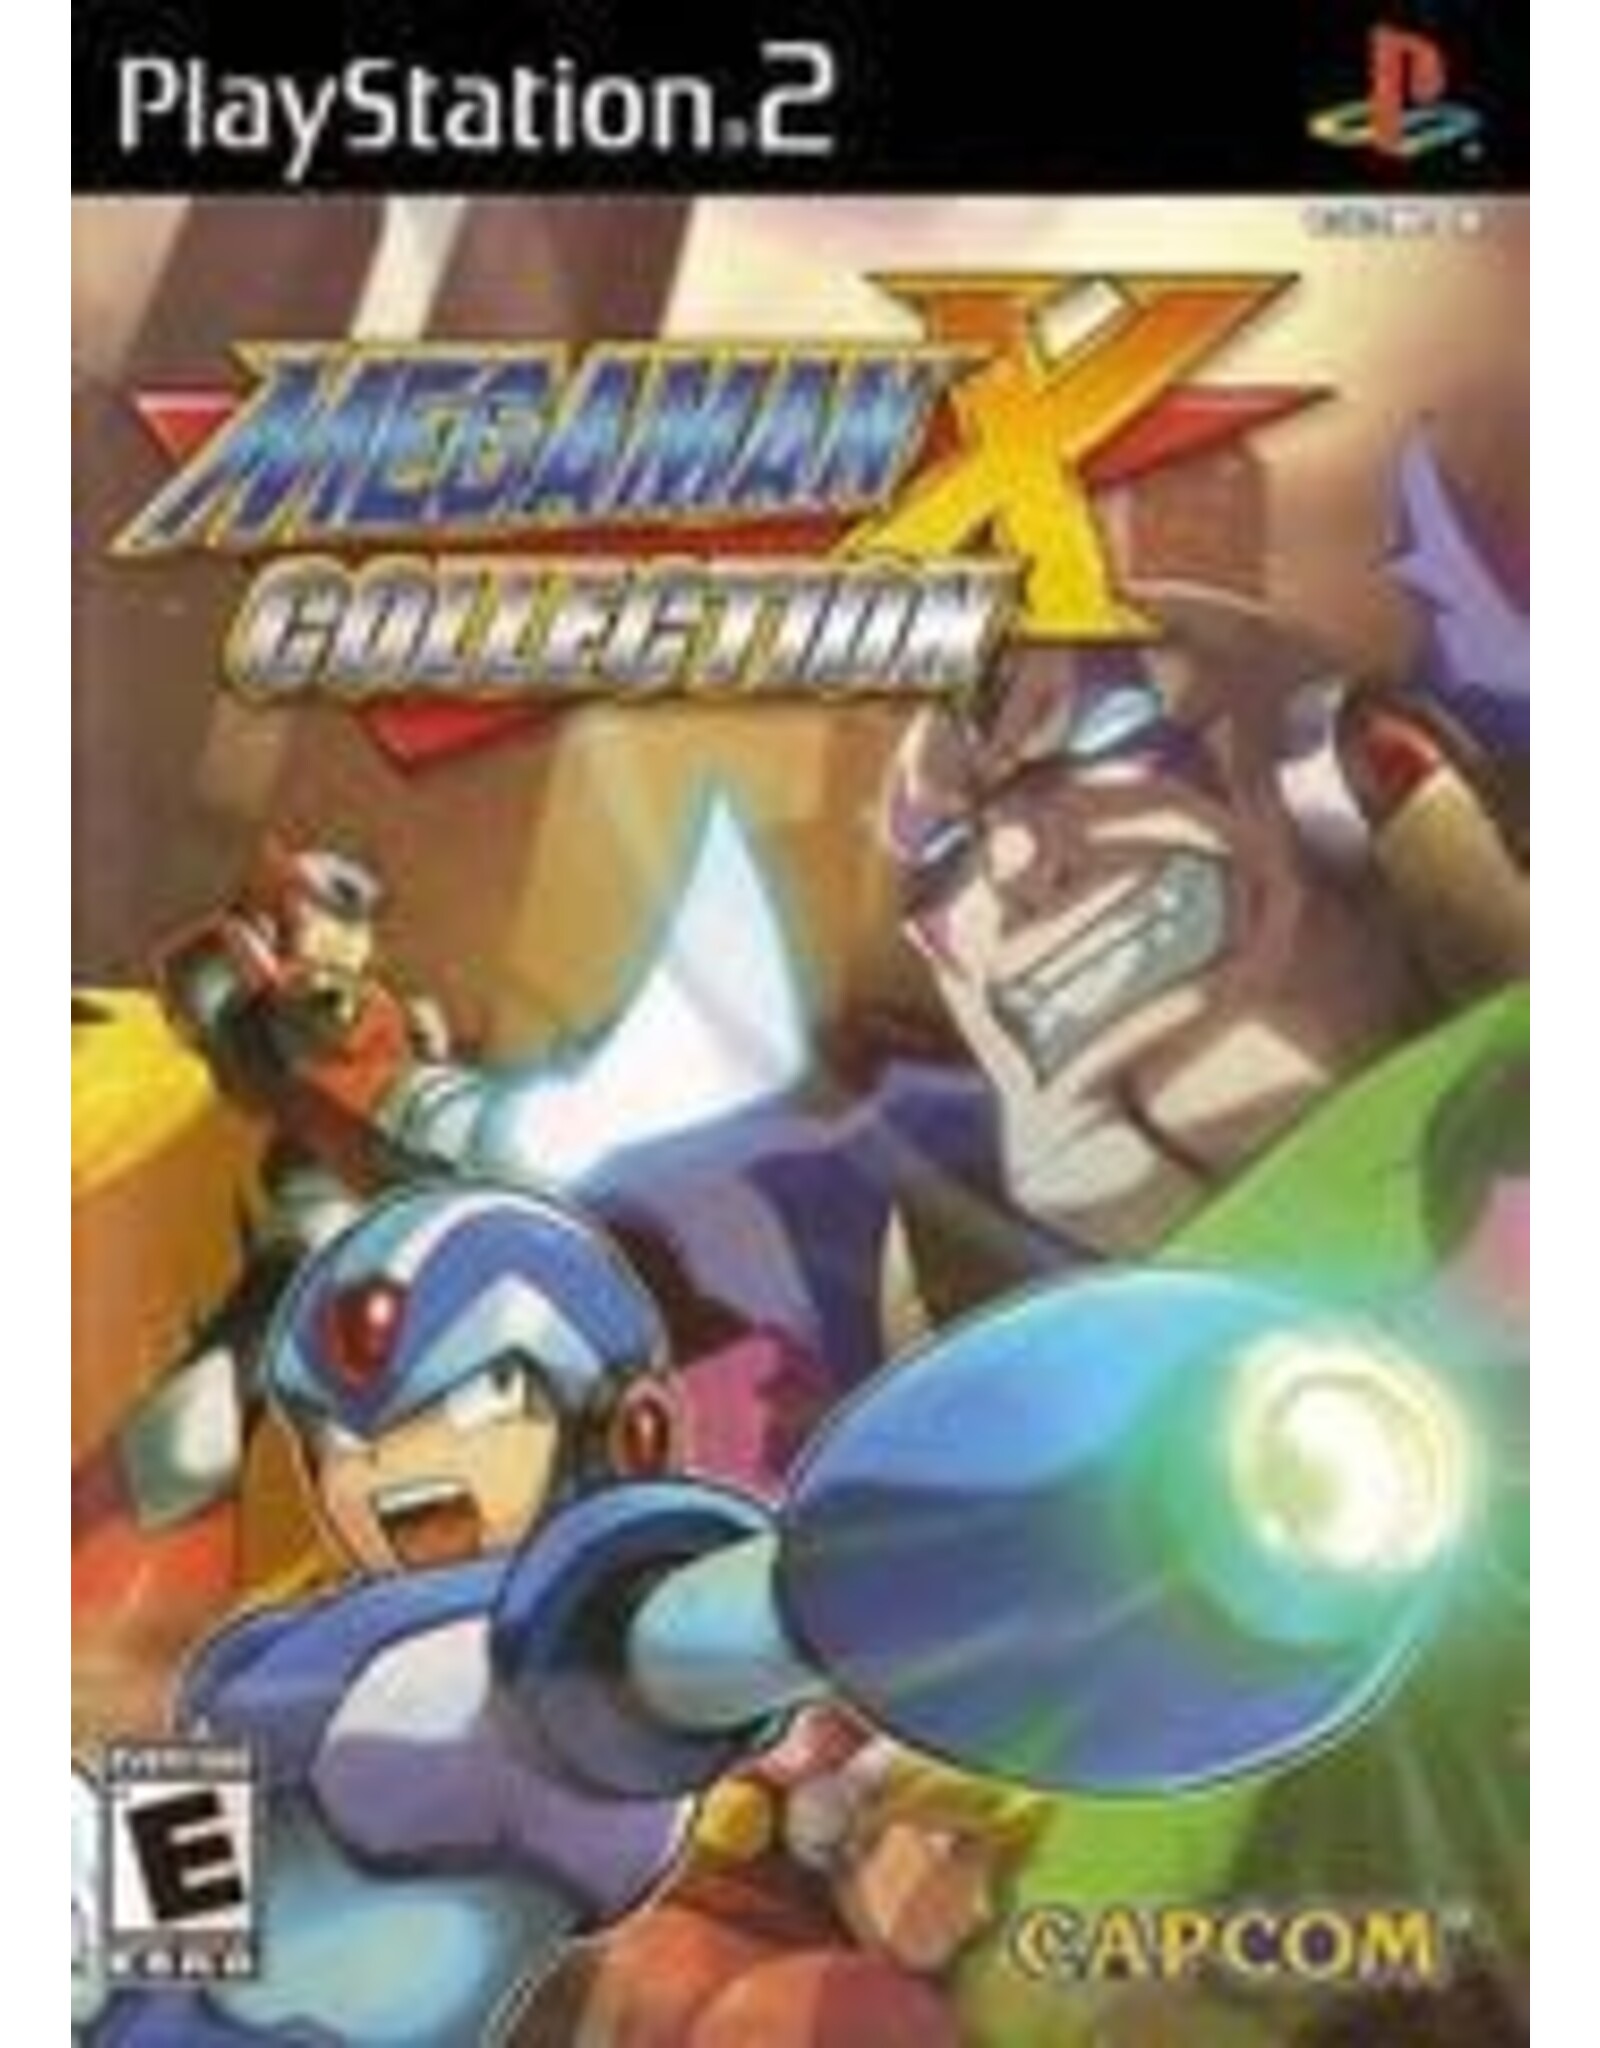 Playstation 2 Mega Man X Collection (Brand New, Factory Sealed)